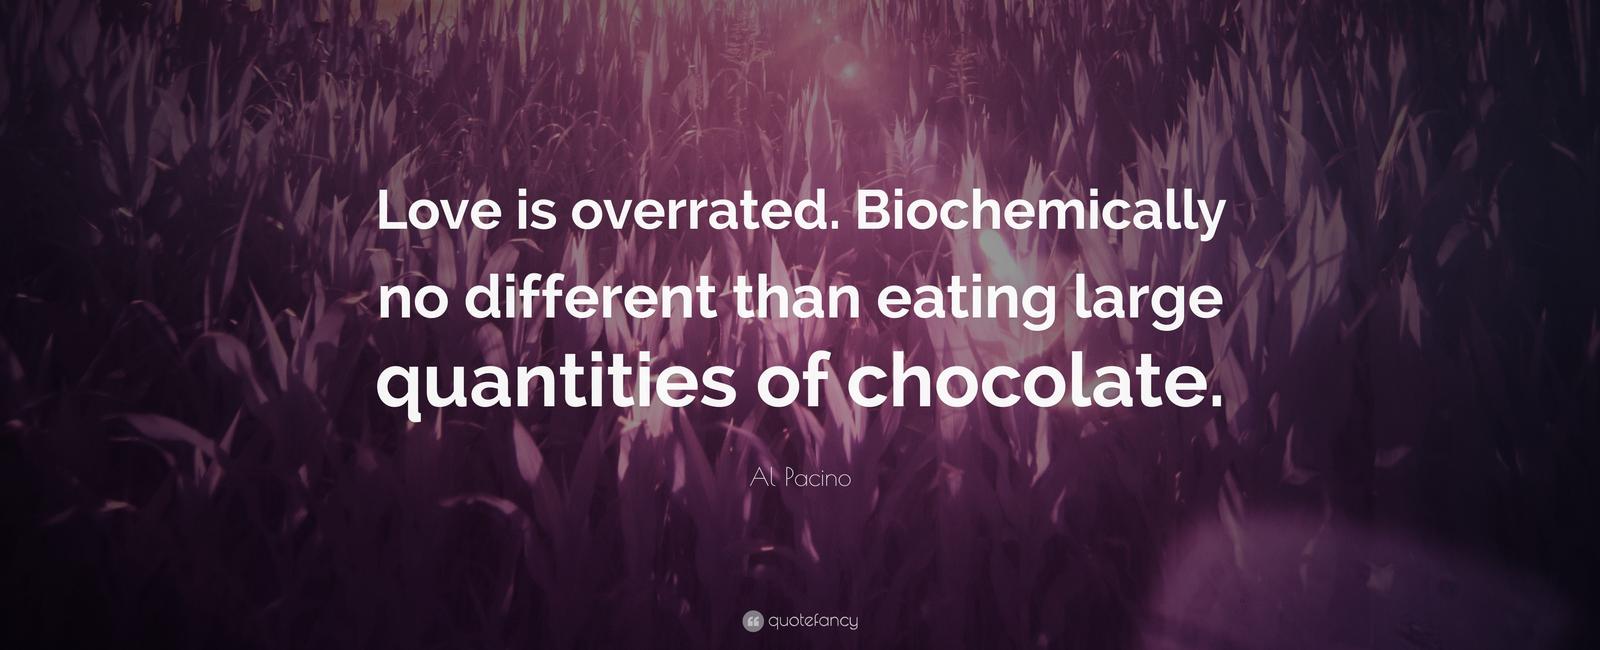 Sex is biochemically no different from eating large quantities of chocolate